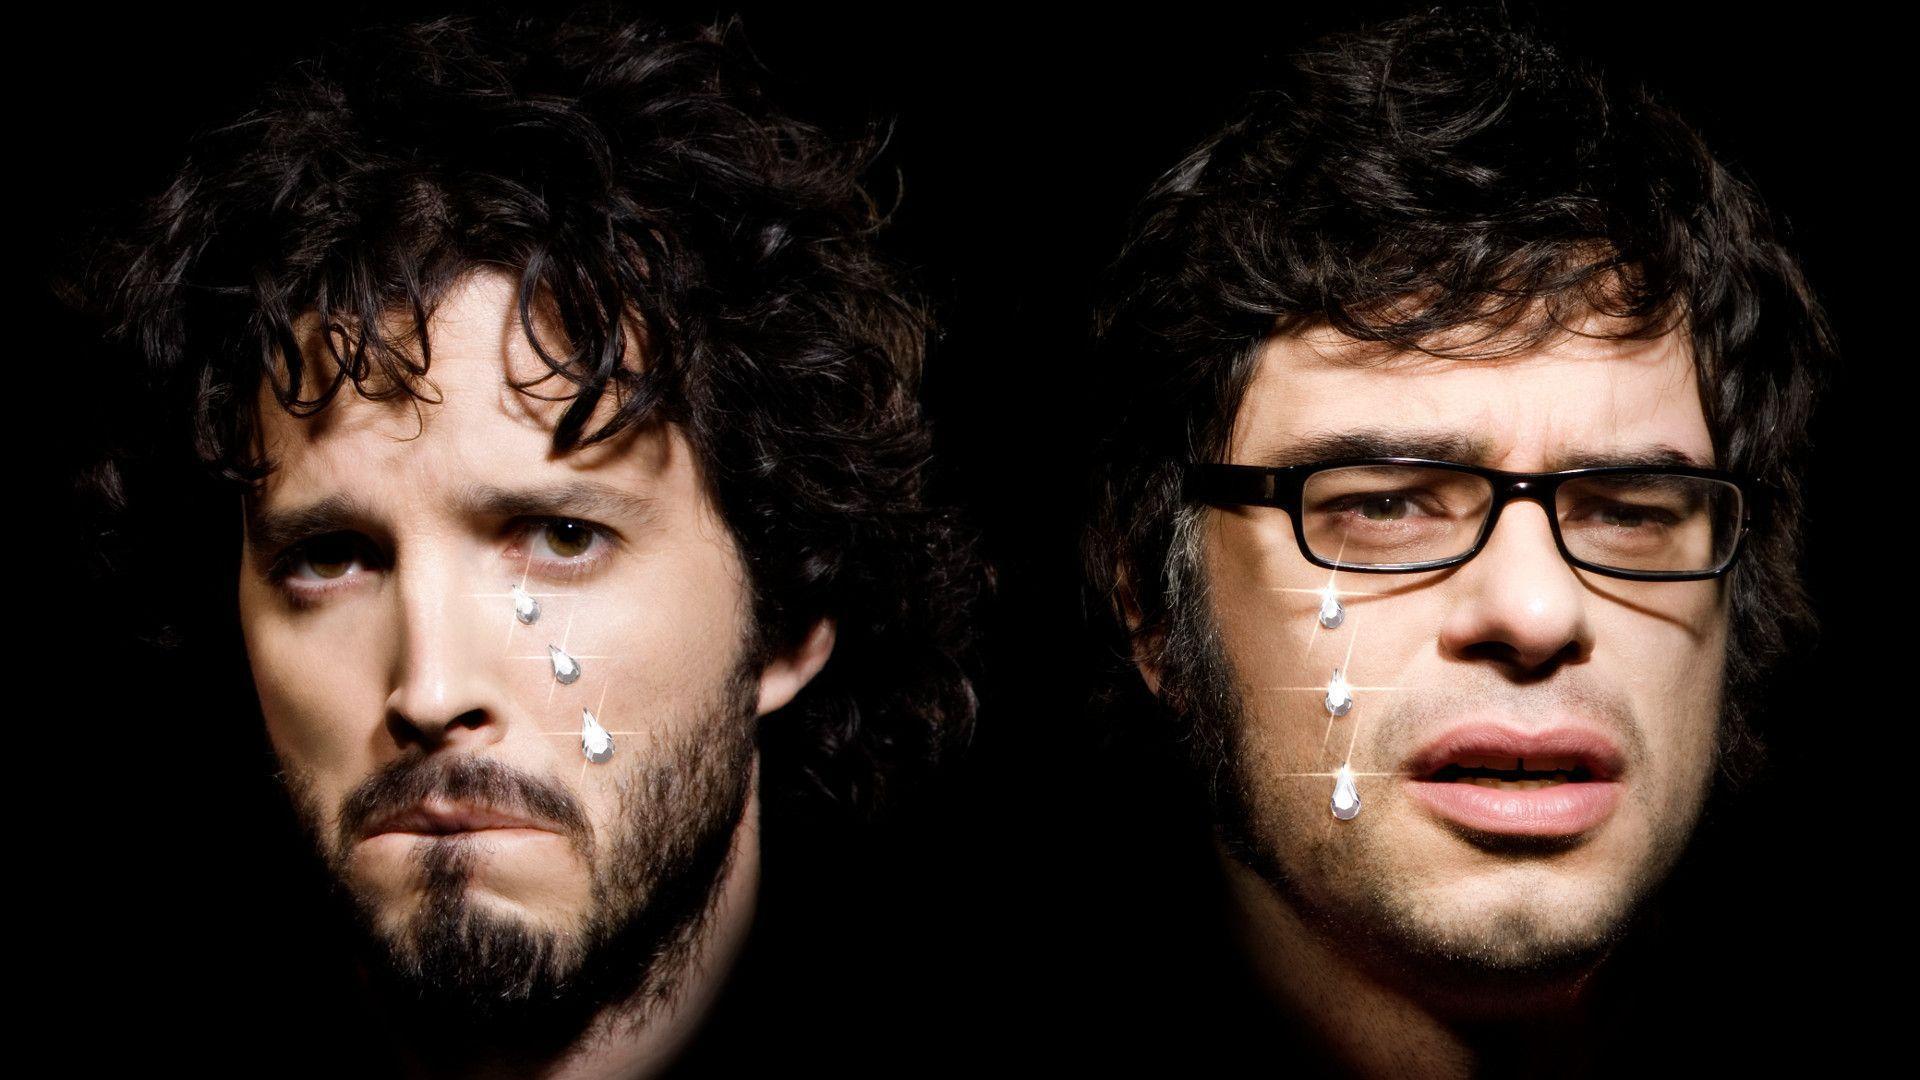 Flight Of The Conchords Wallpaper. Flight Of The Conchords